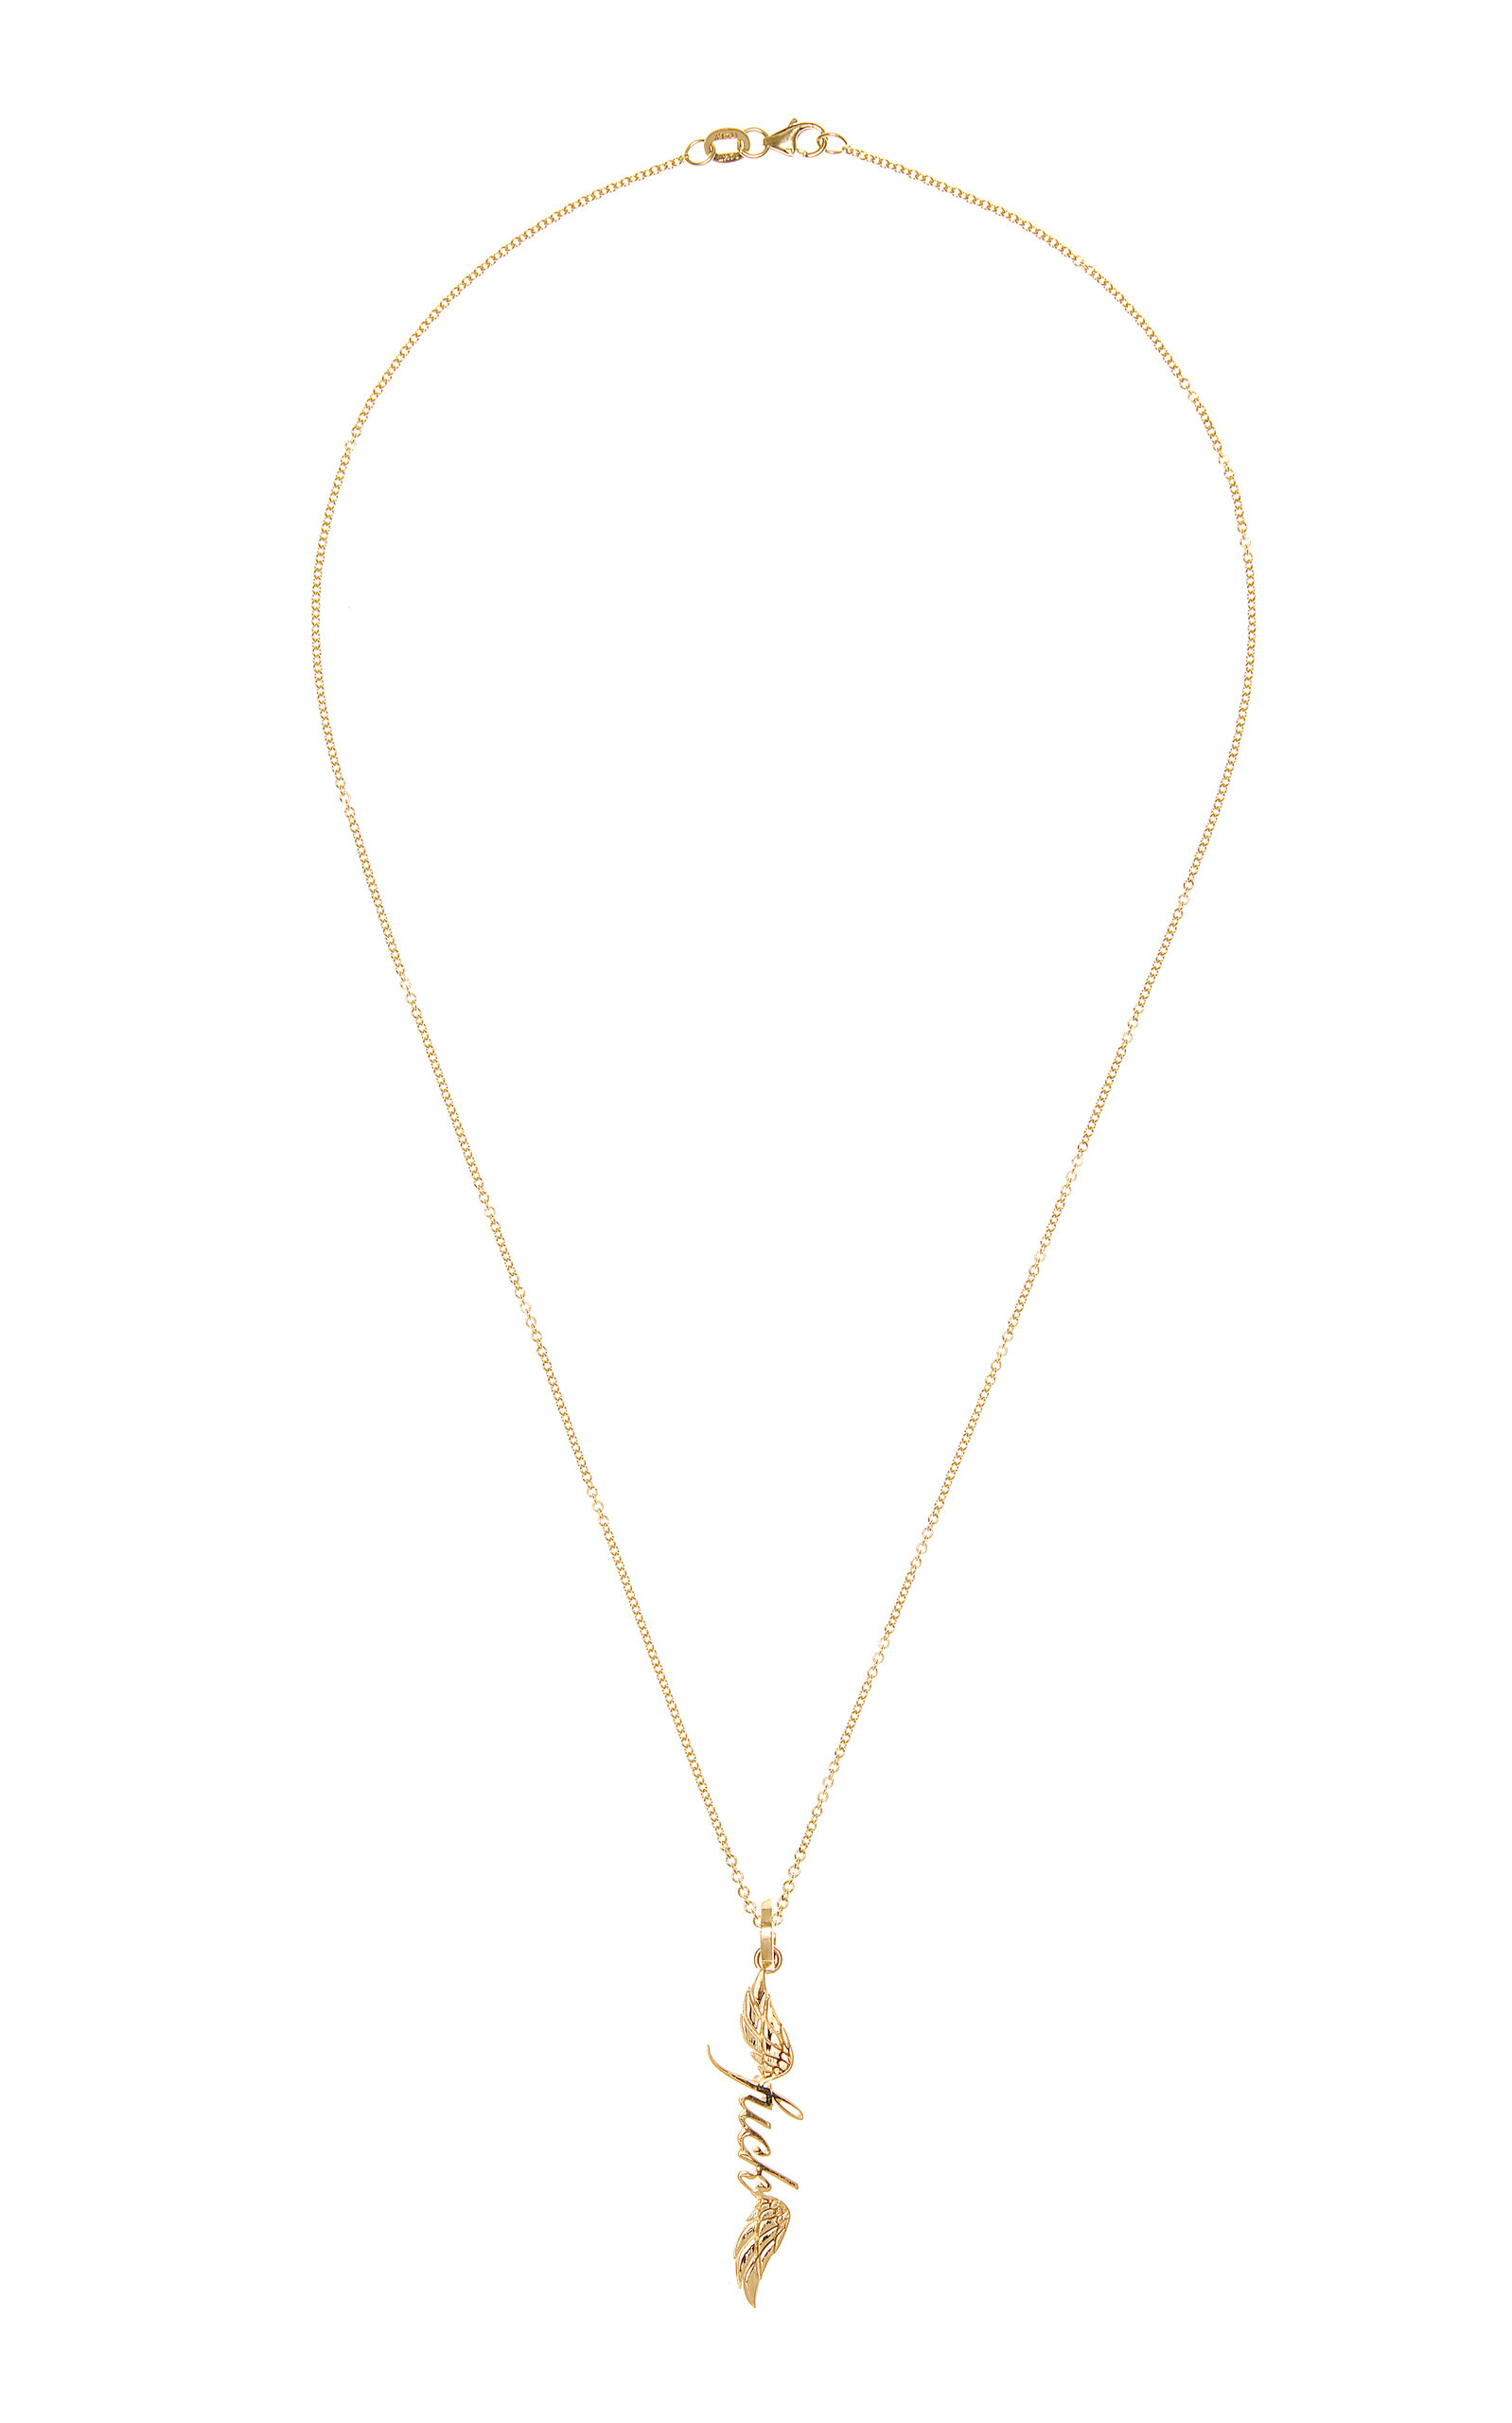 Dru Flying F*** 14k Yellow Gold Necklace